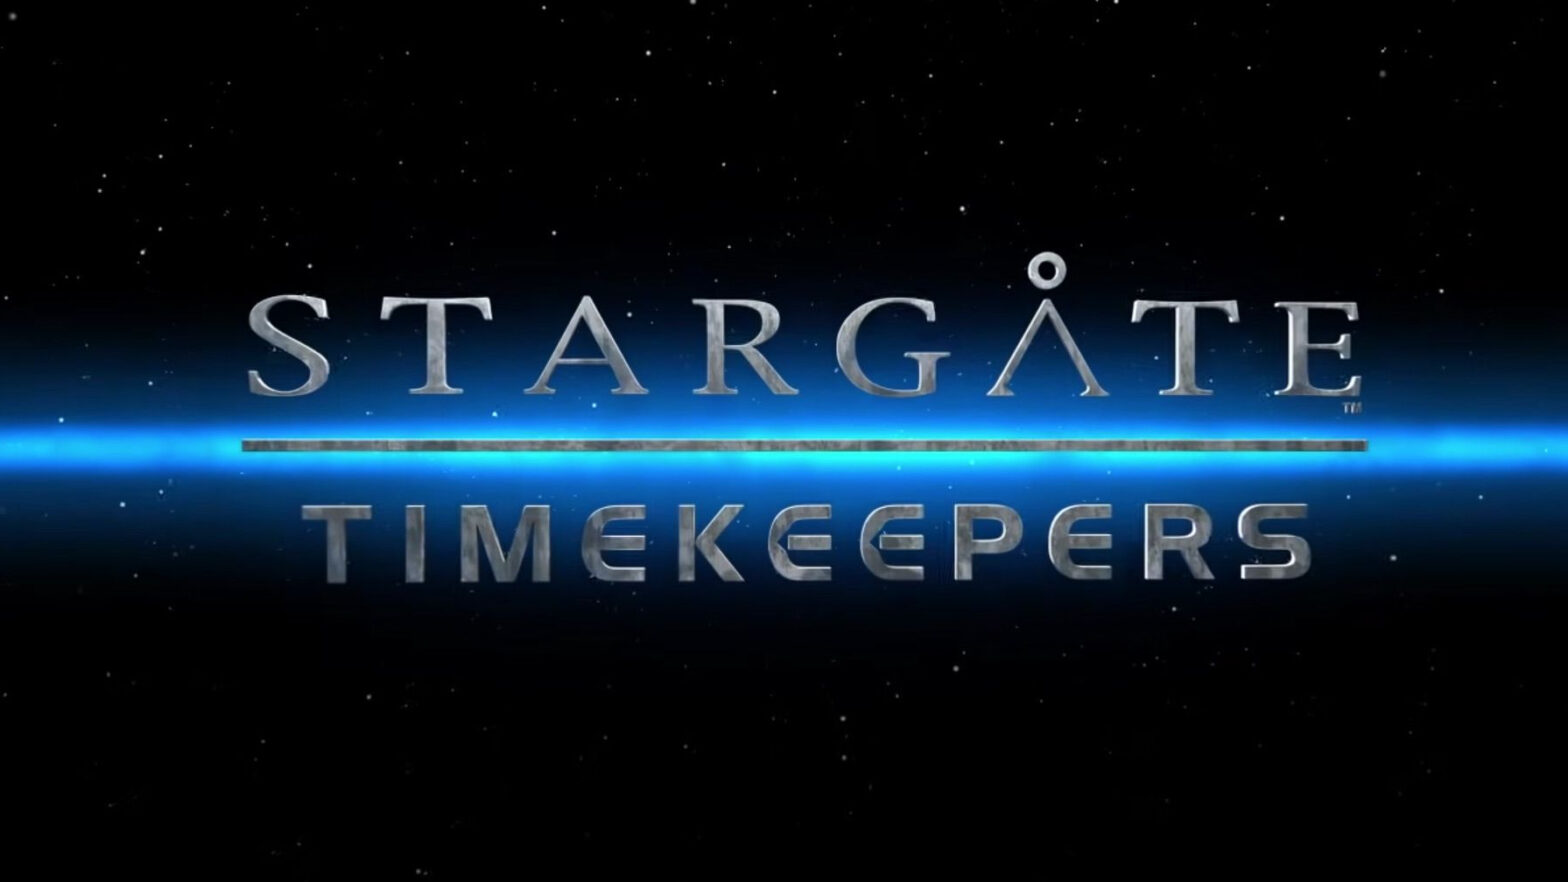 Watch The Trailer For The New Stargate Video Game